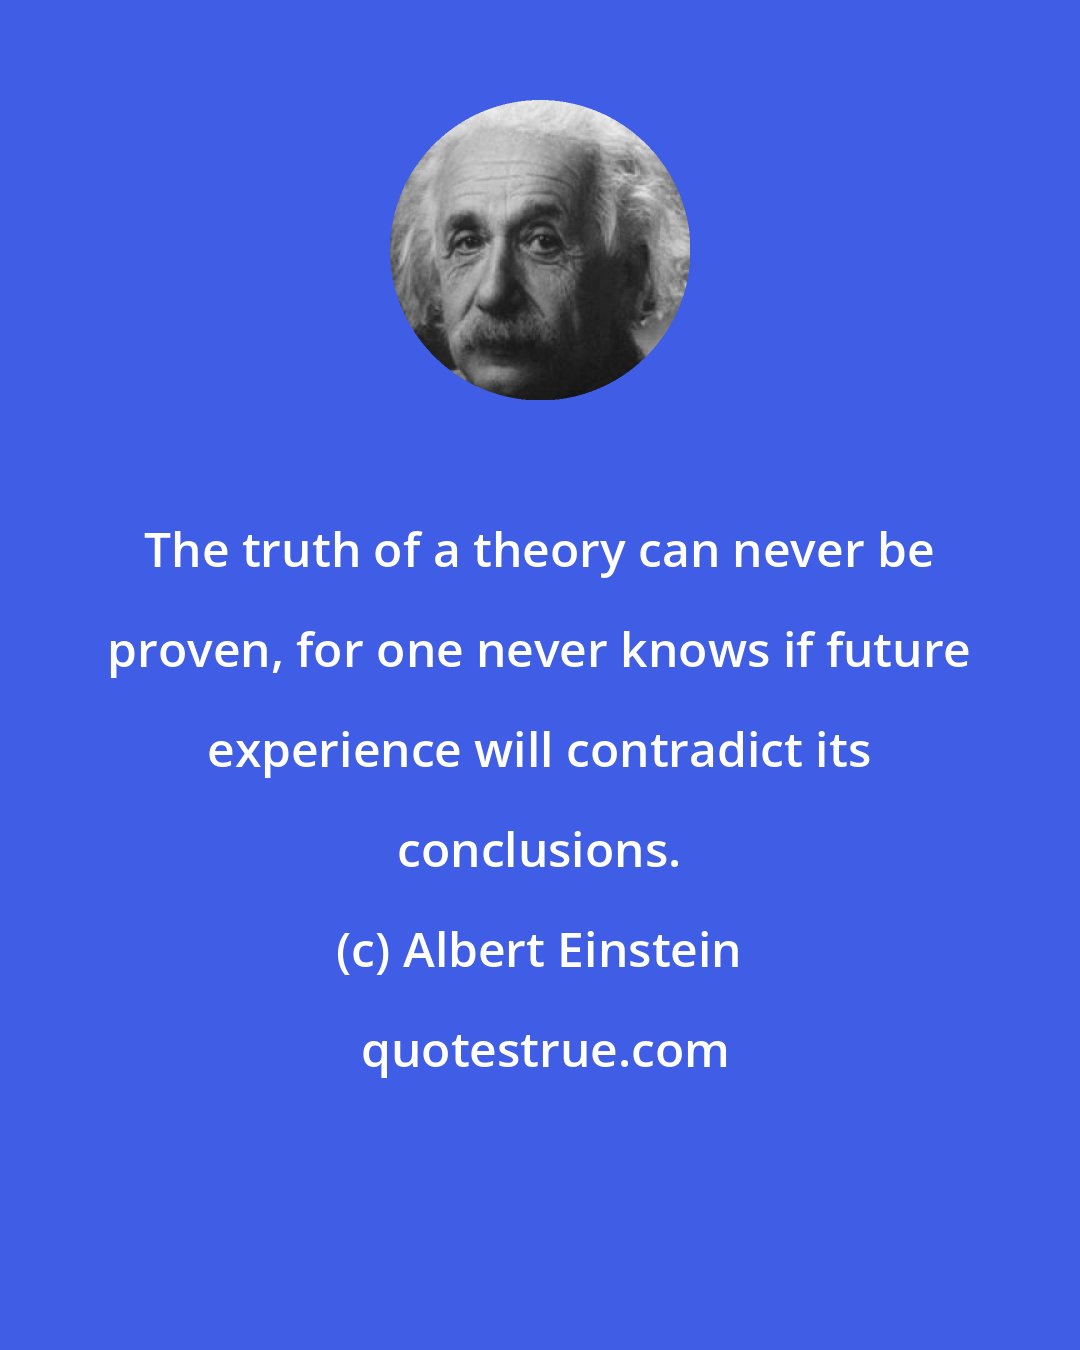 Albert Einstein: The truth of a theory can never be proven, for one never knows if future experience will contradict its conclusions.